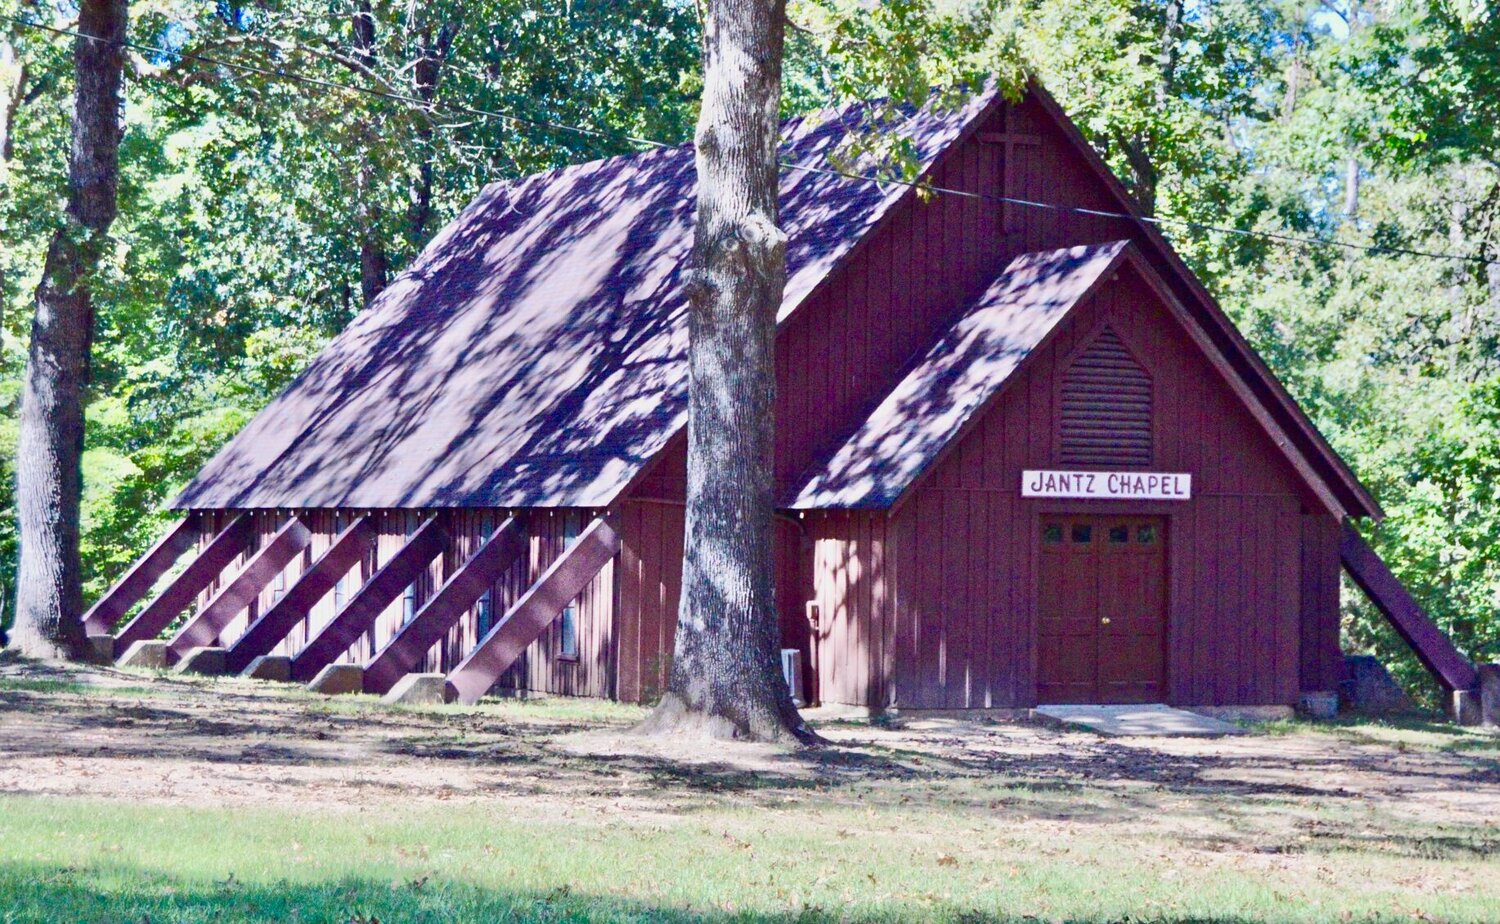 Jantz Chapel, shown in this 2017 photo, was built in the early 1960s with a construction cost of $3,000 at at the time. Today, that cost would be about $30,767, according to the Consumer Protection Index Inflation Calculator. Hammond Mill Camp, where the chapel is located, has just two months left to reach its capital improvements fundraising goal of $160,000, with less than $45,000 to go to get there.